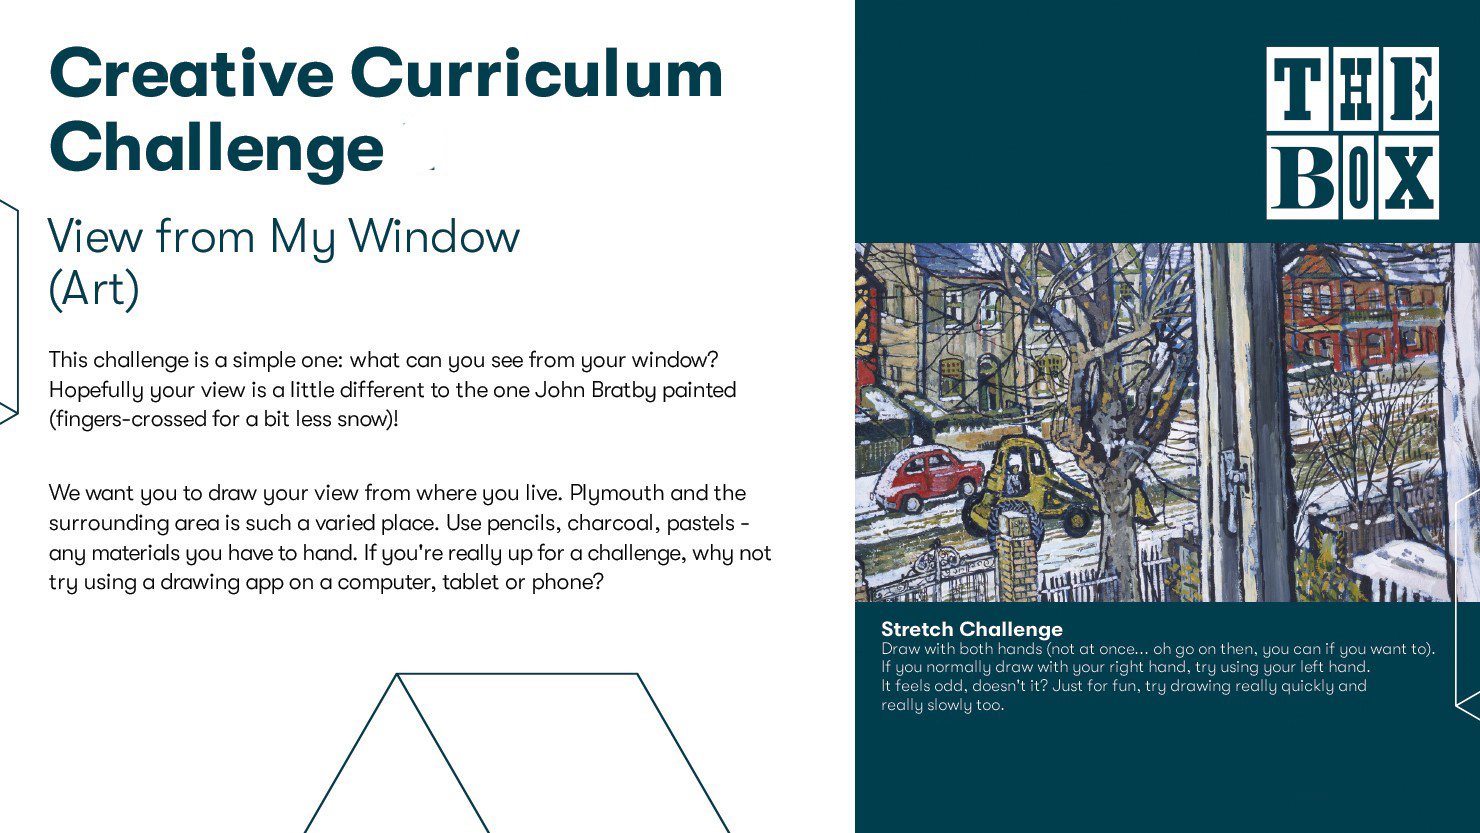 Graphic for The Box's drawing curriculum challenge